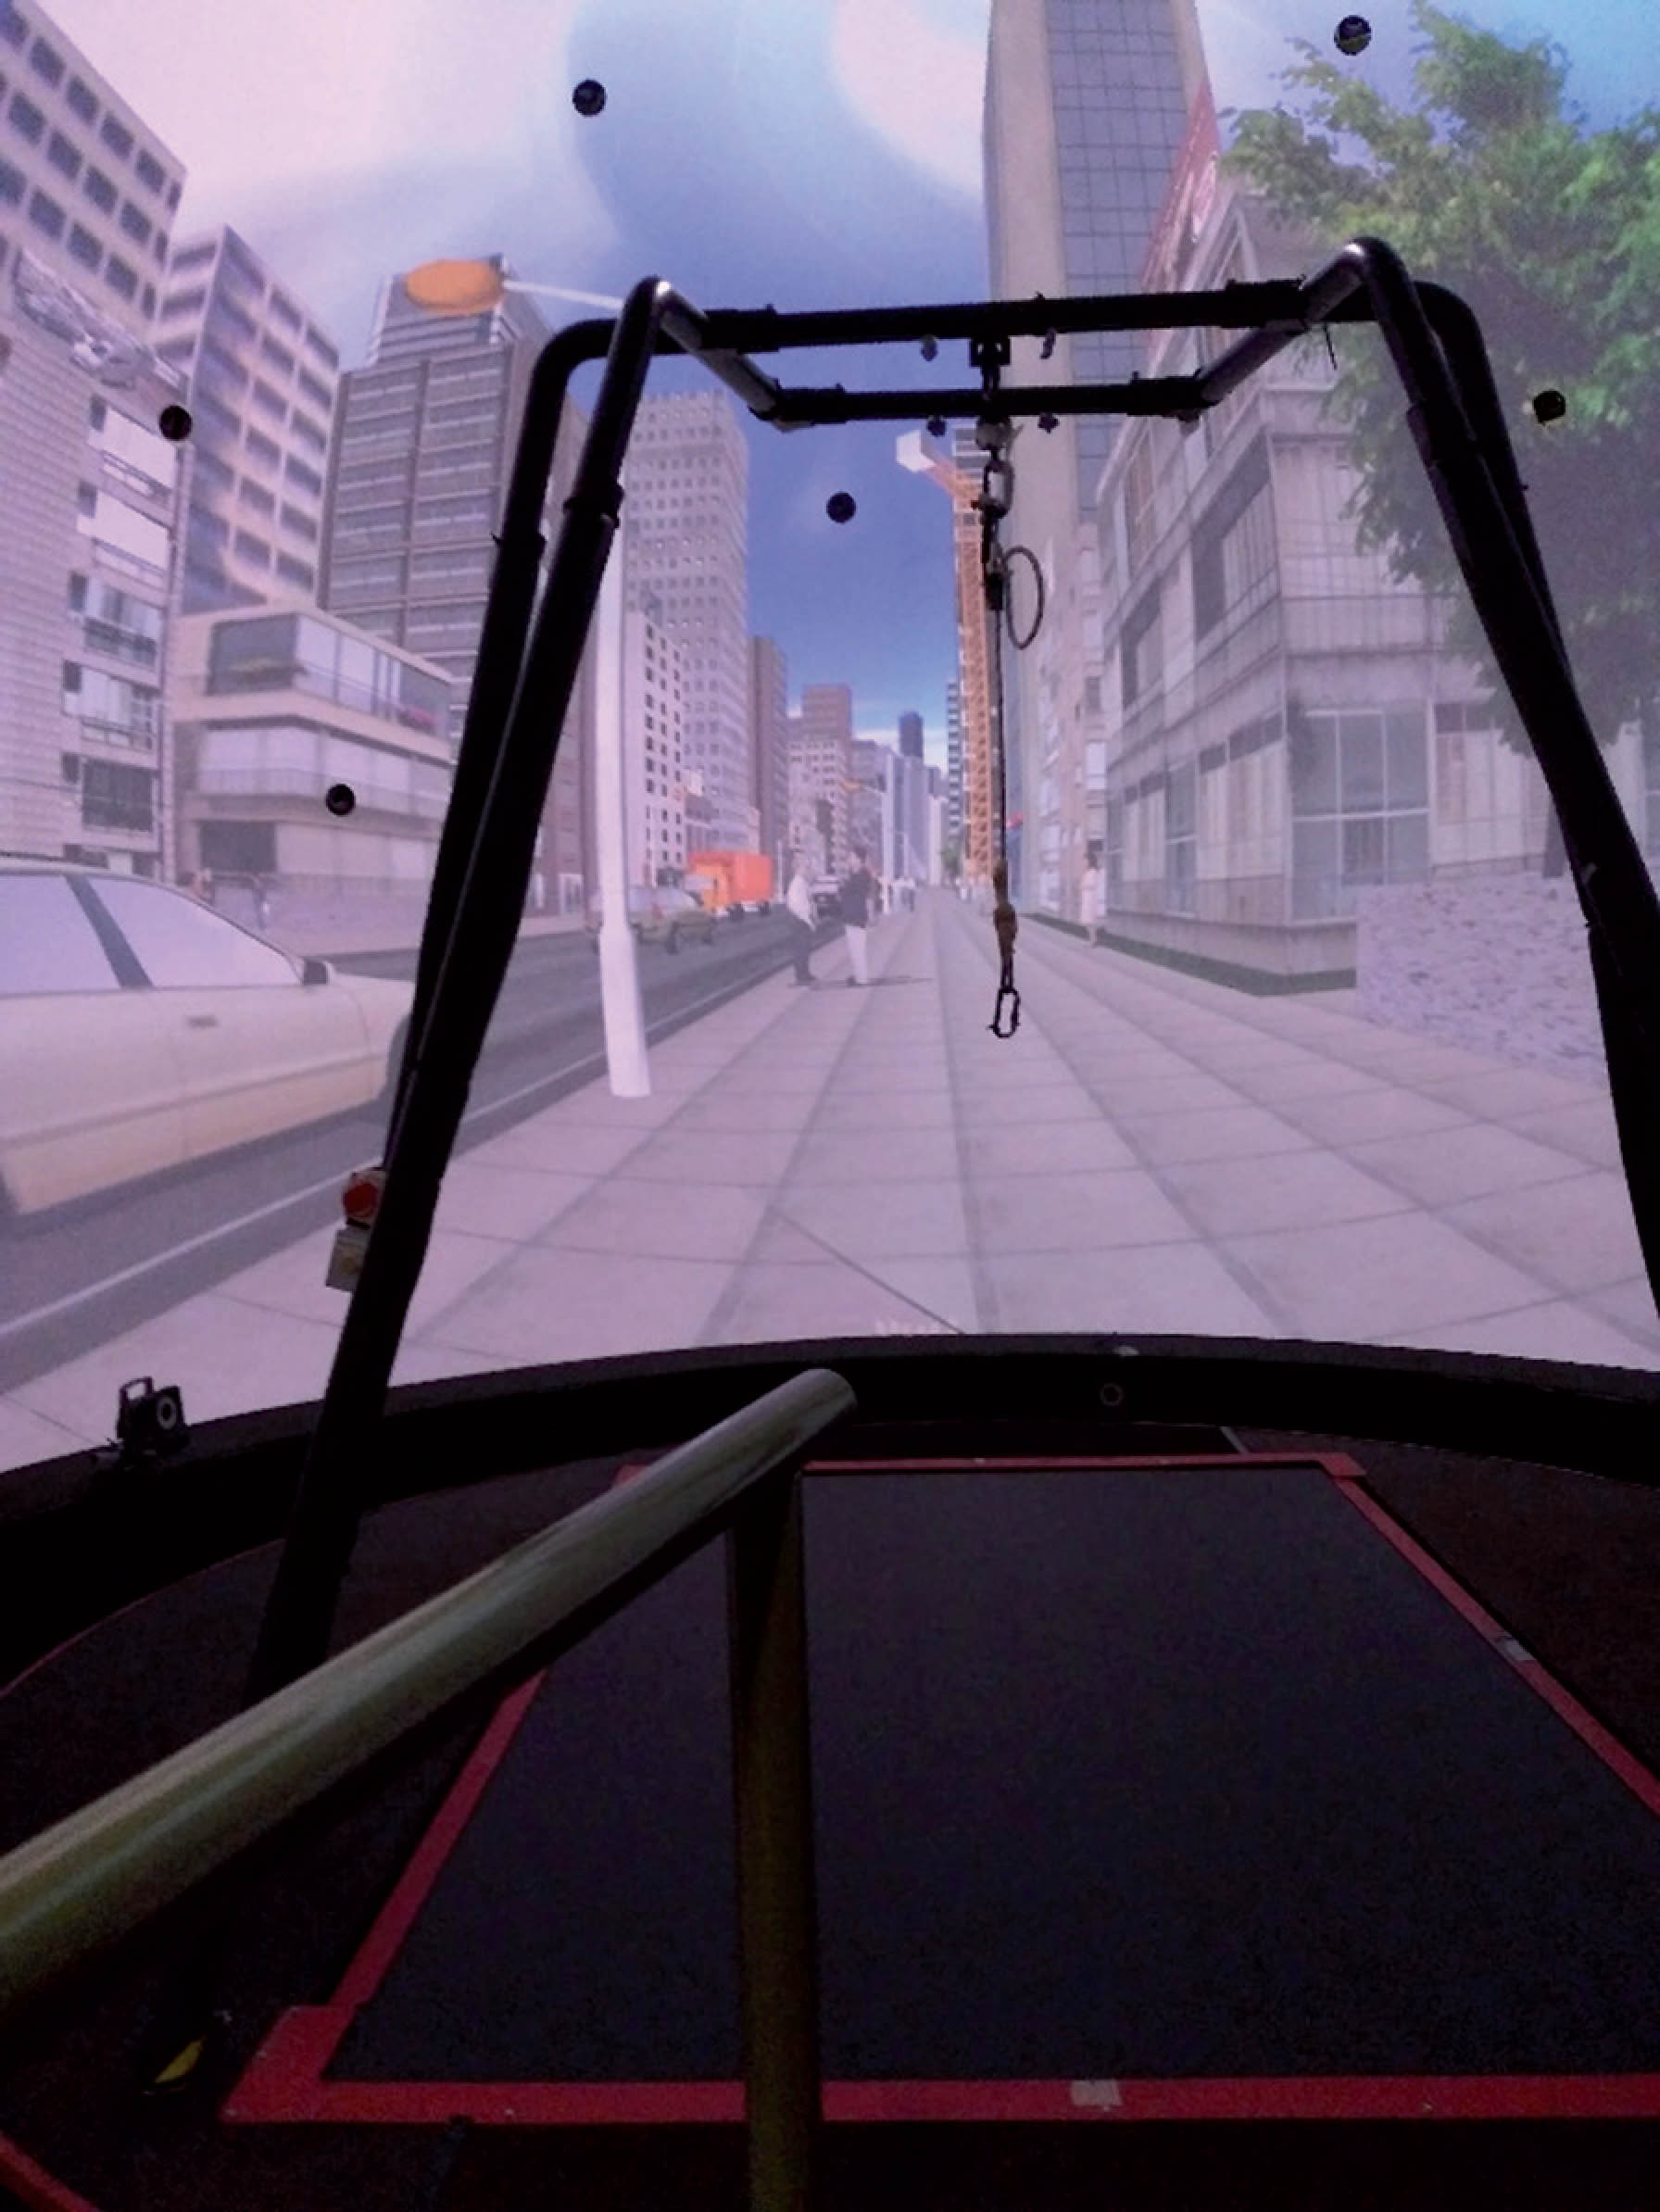 Virtual reality city scene in a Computerized Assisted Rehabilitation Environment for use during treatment of Mal de Debarquement Syndrome.